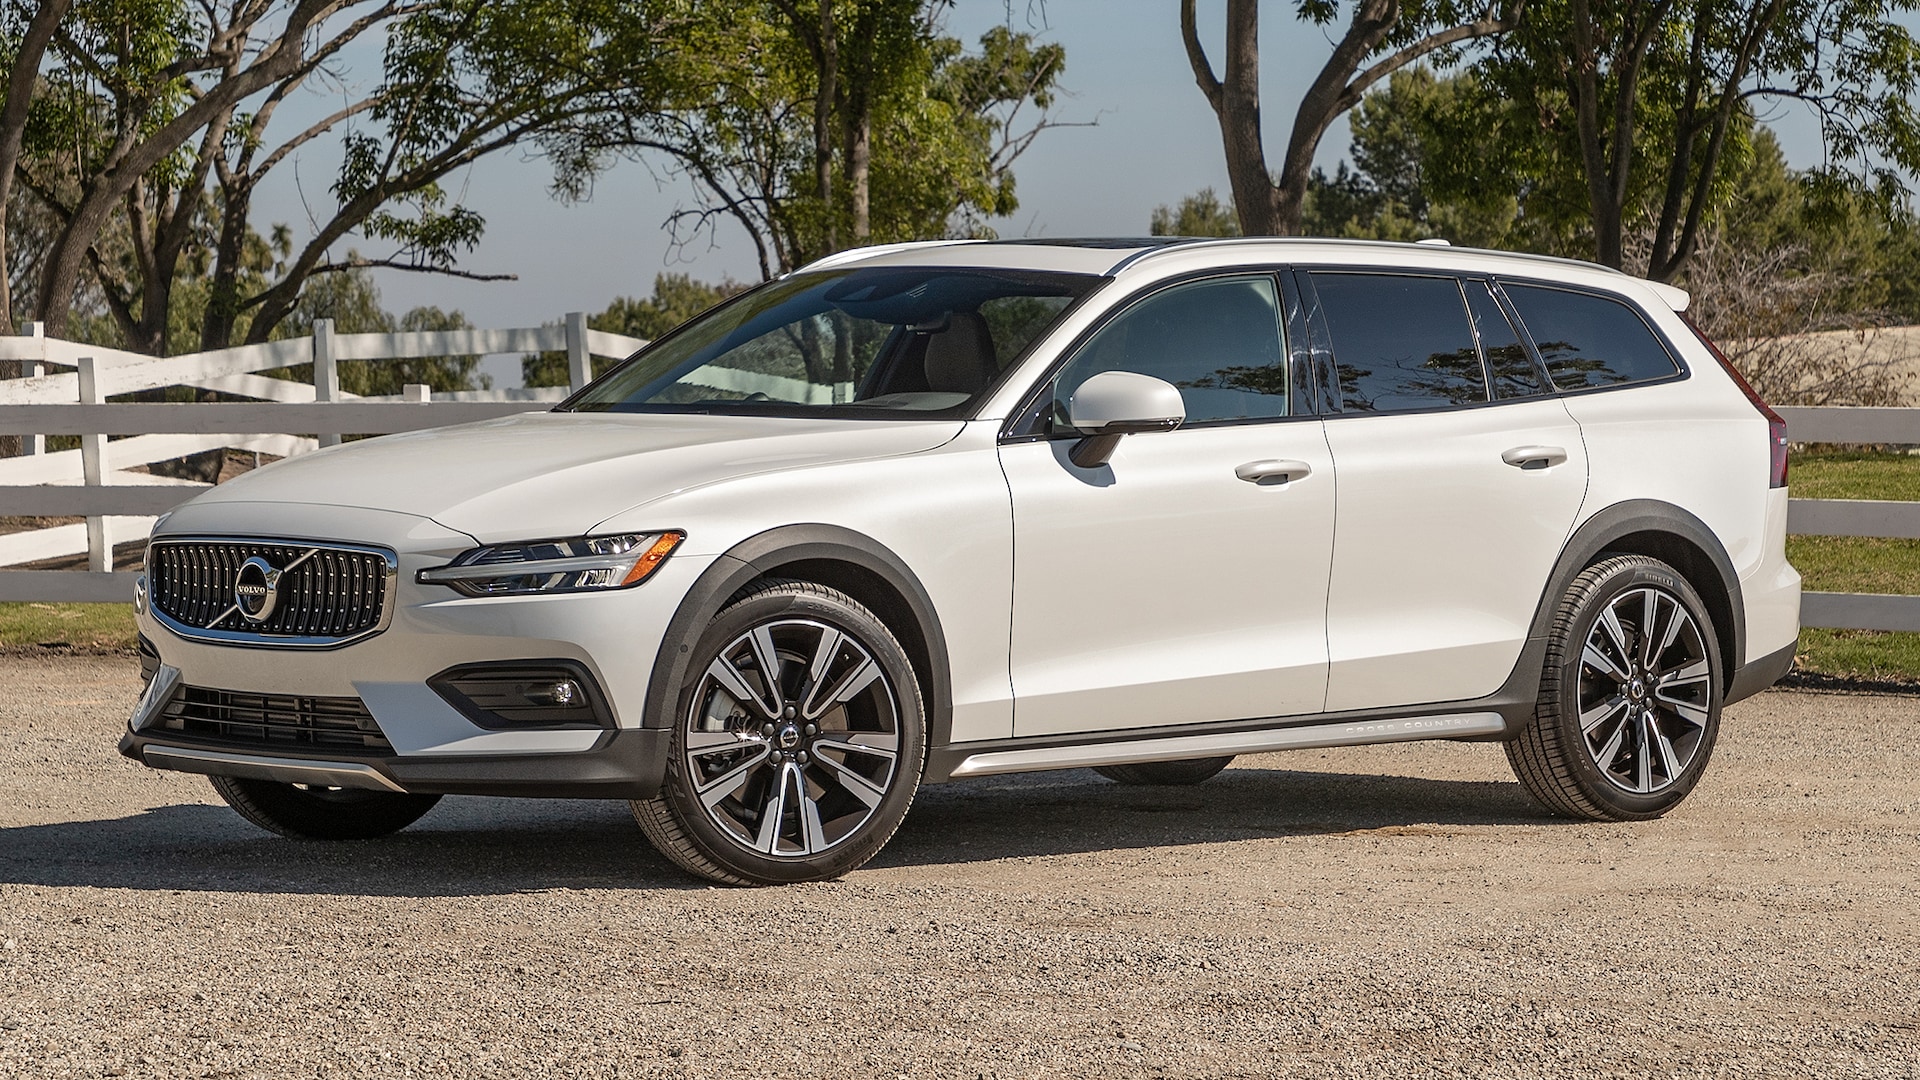 2021 Volvo V60 Prices, Reviews, and Photos - MotorTrend